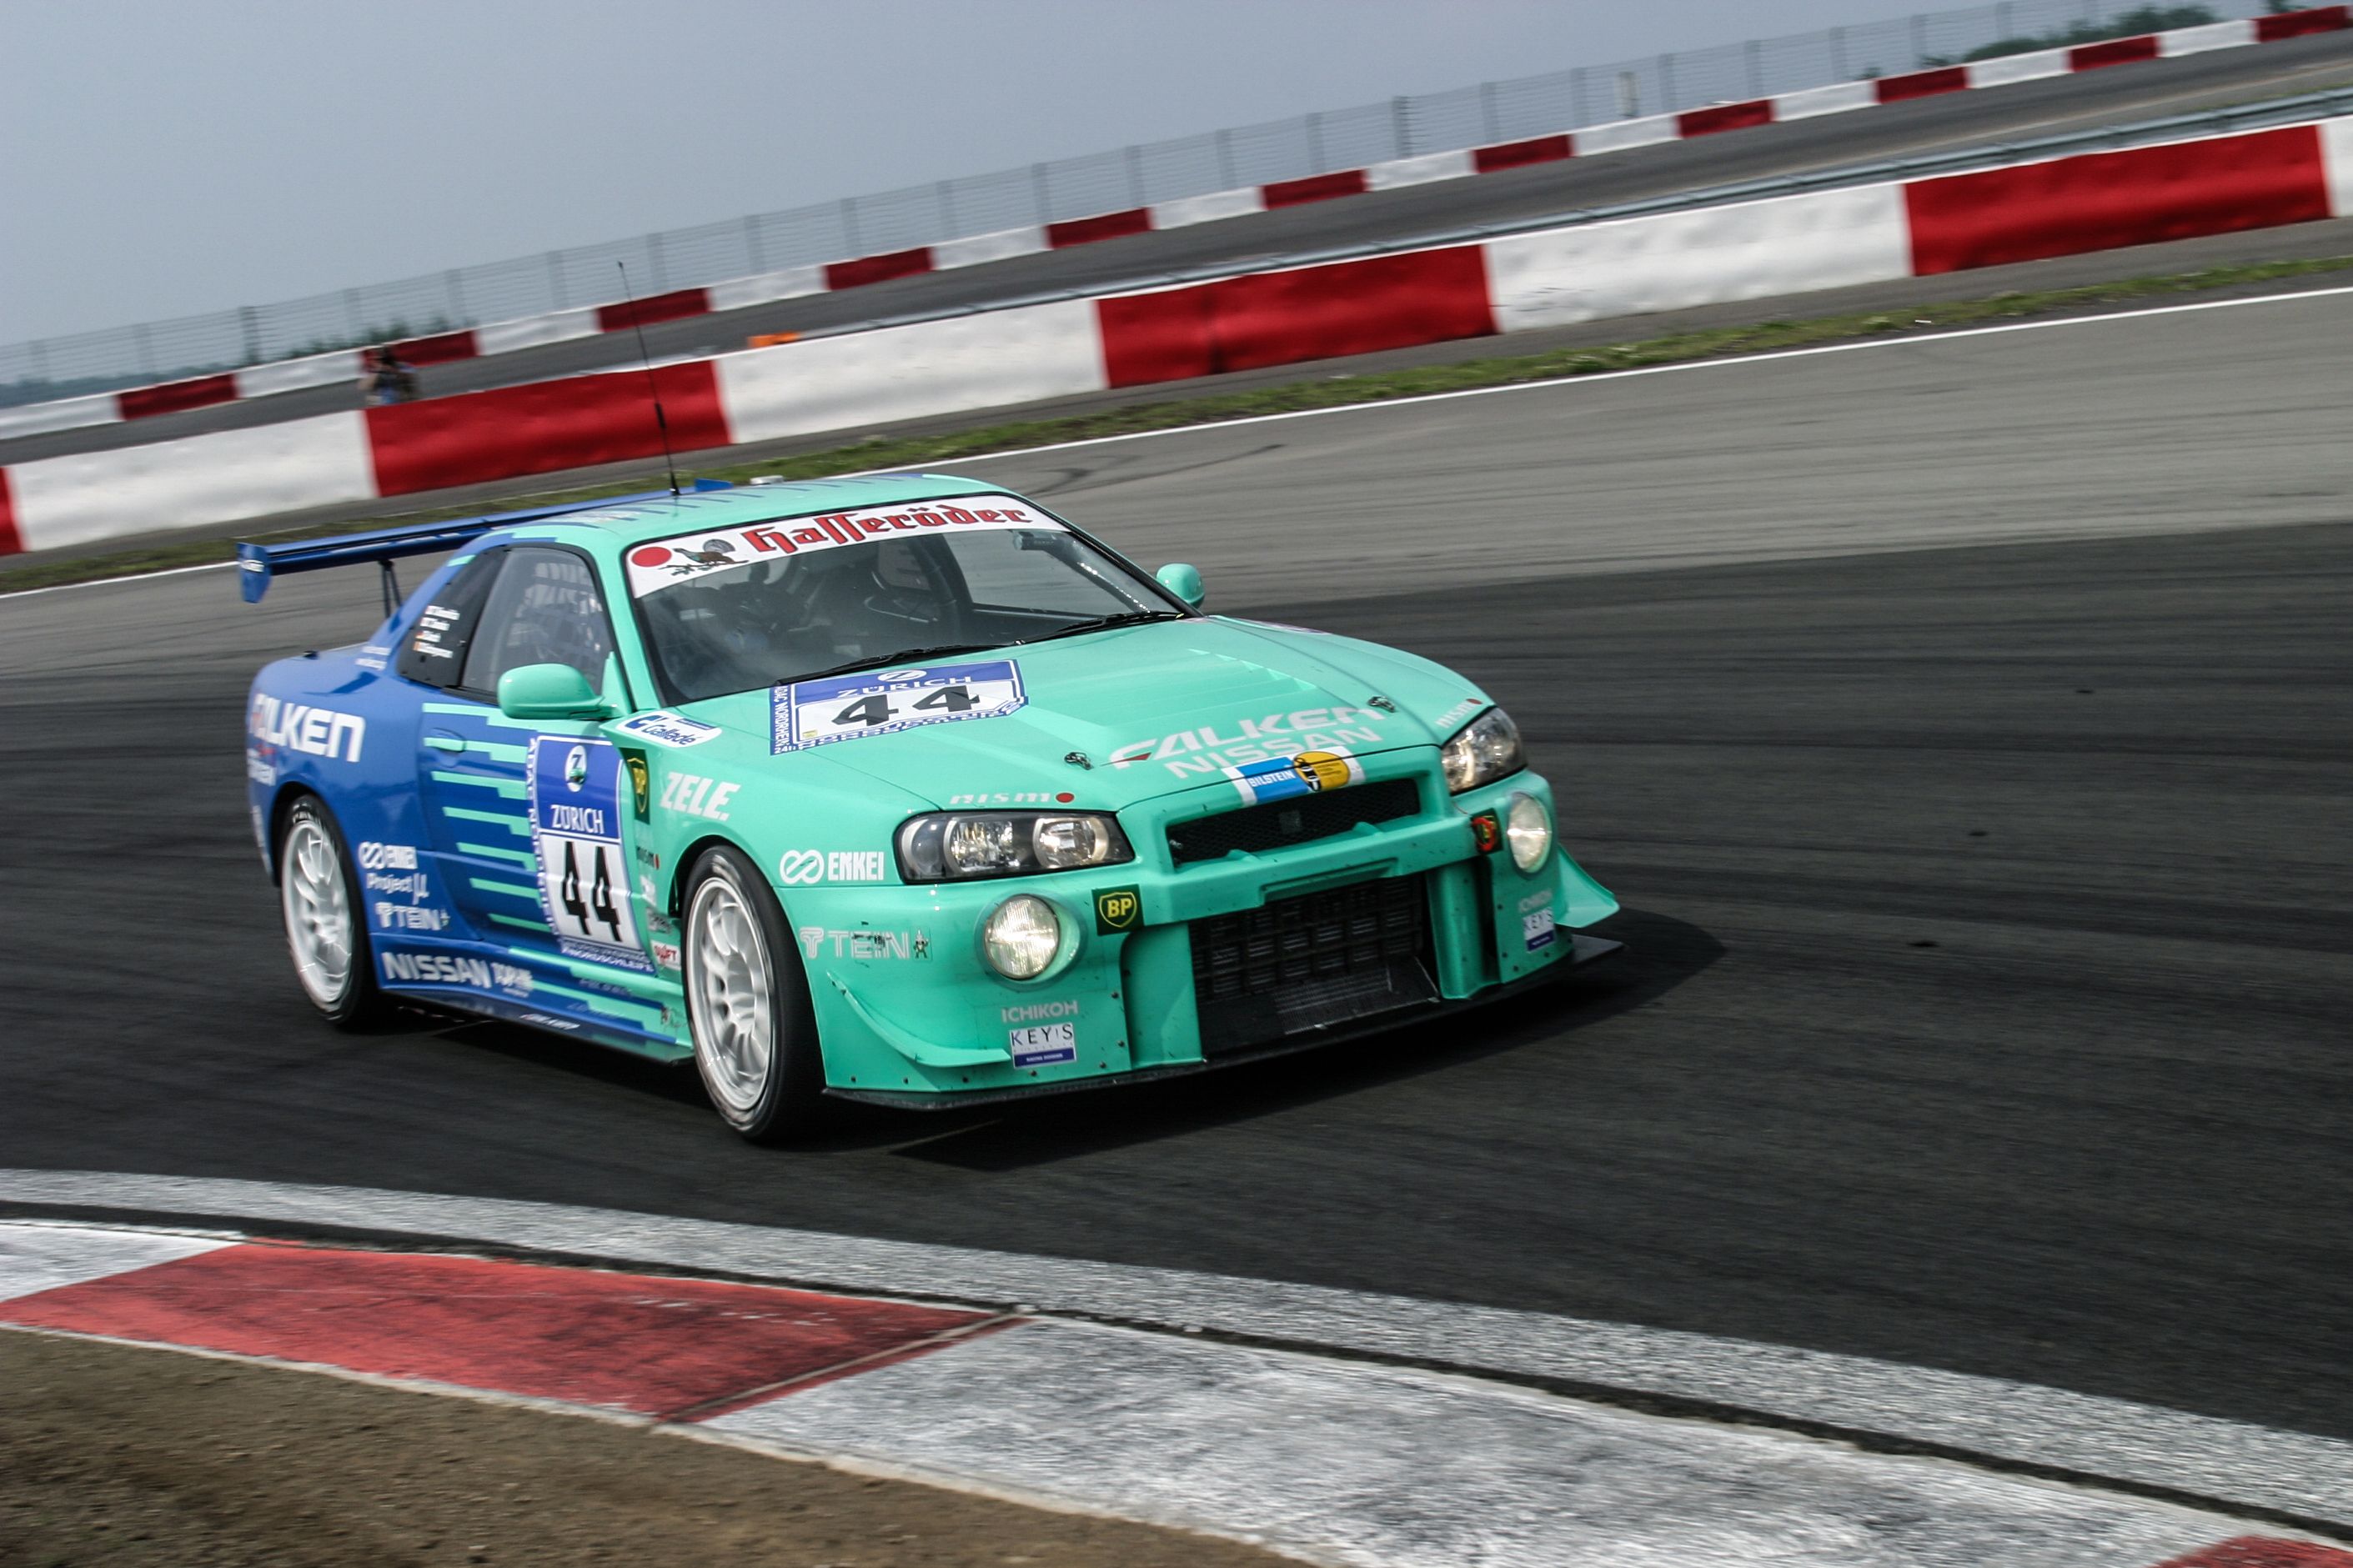 Falken Tire - Will there be a Nissan Skyline GTR R36? Grounded